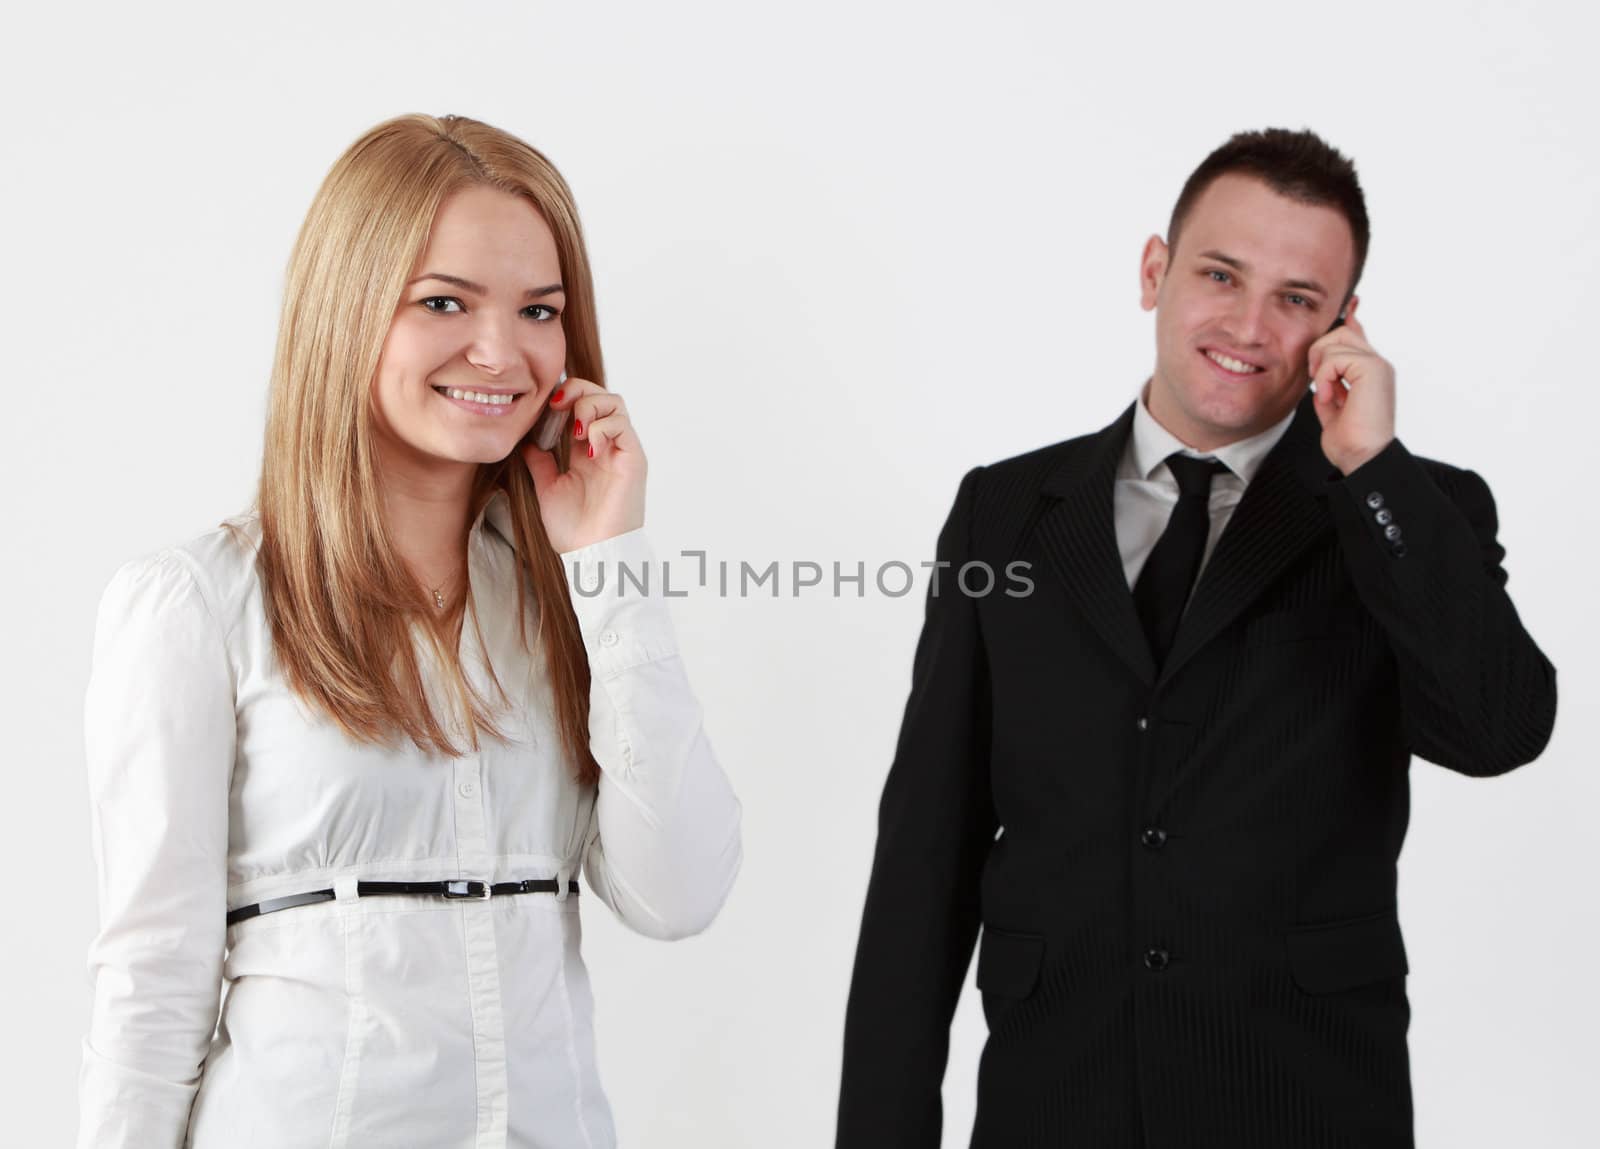 Young couple using mobile phones.Selective focus on the blonde woman.